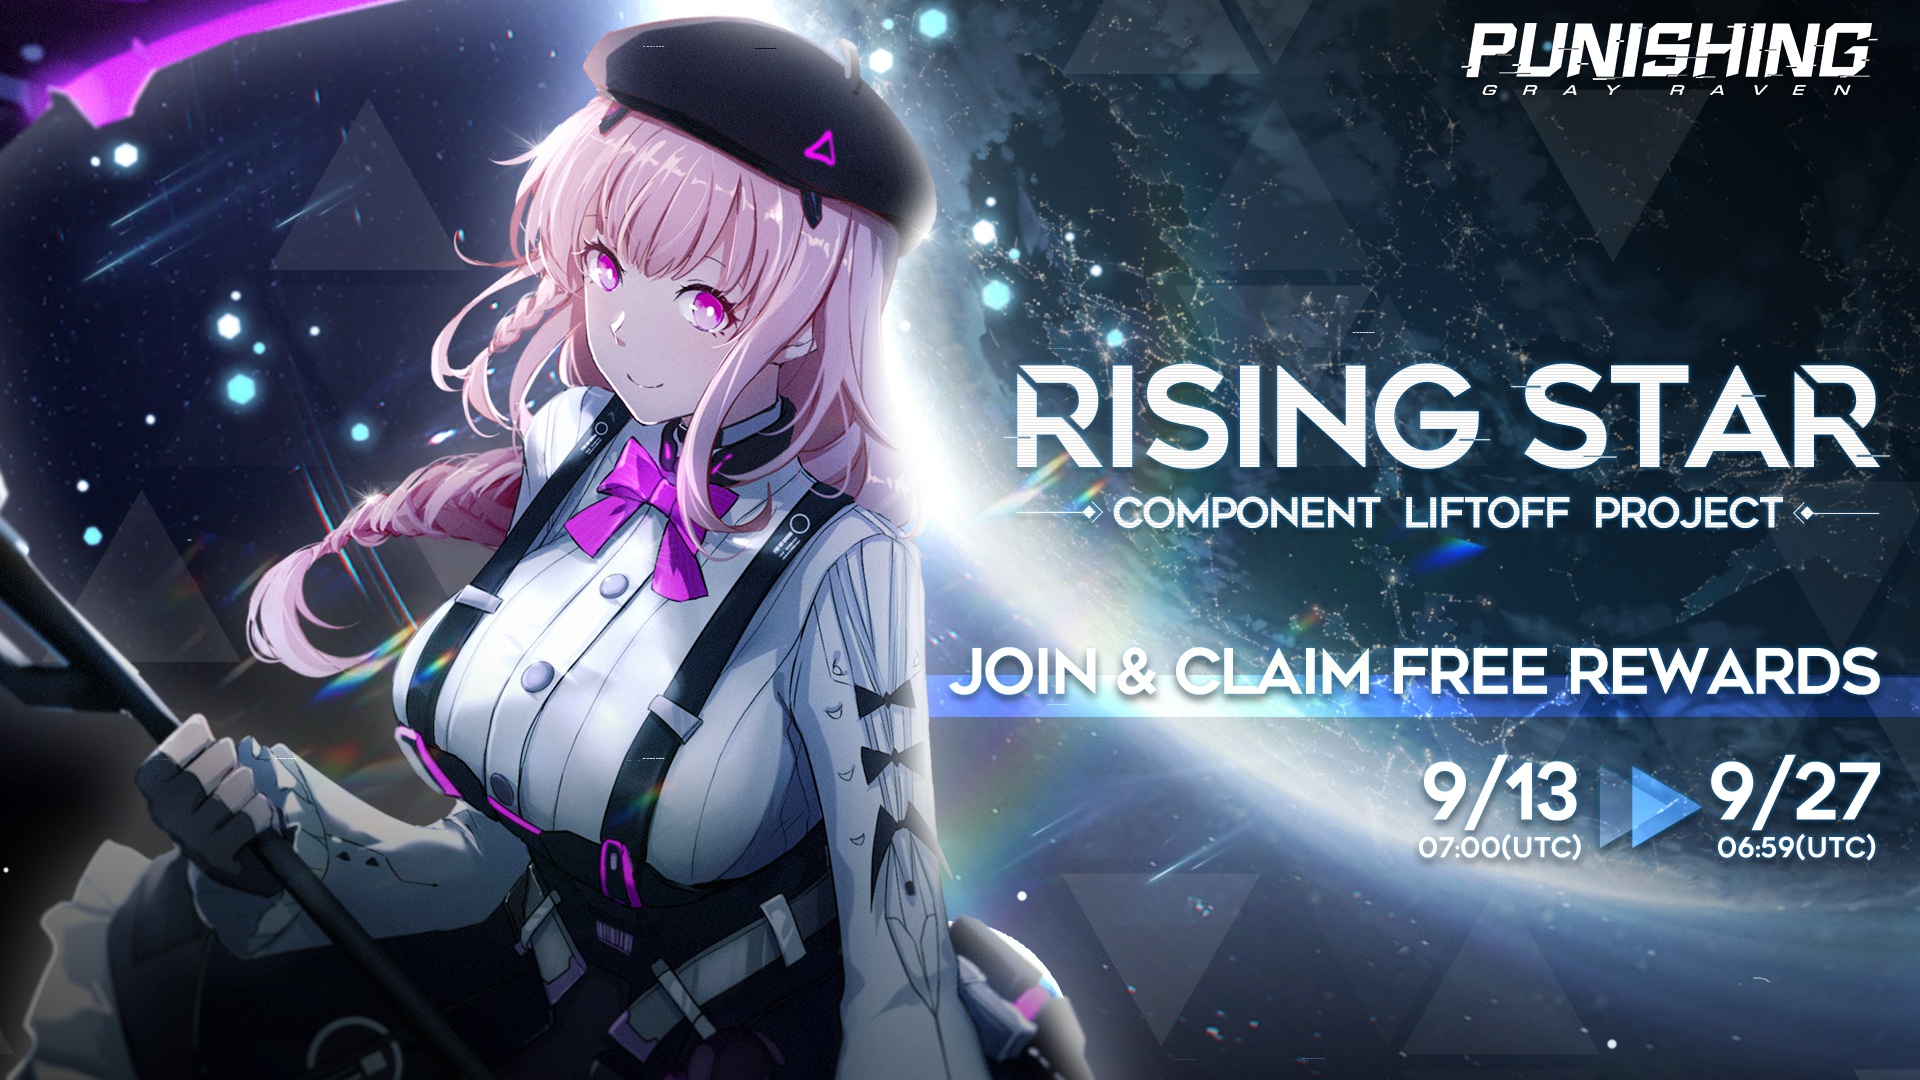 Punishing: Gray Raven dole out Rising Star Event and Straylight Terminal Event